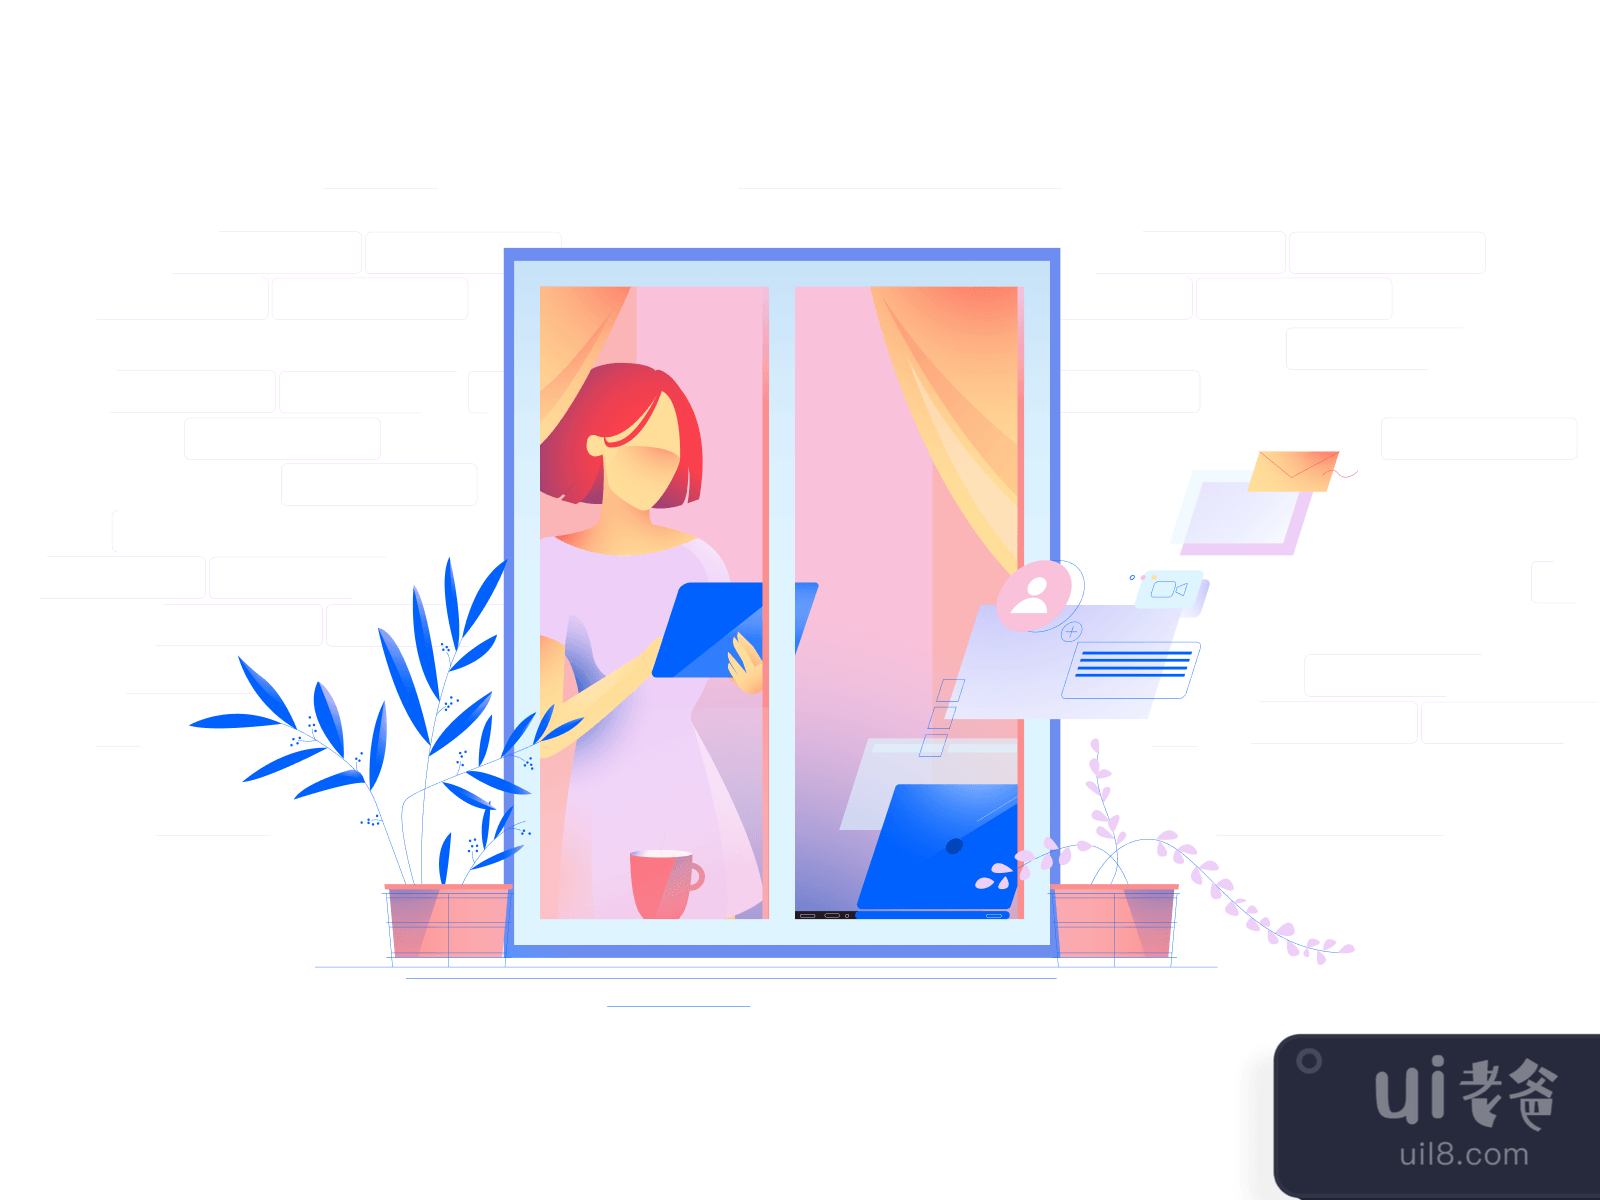 Meetup Illustrations for Figma and Adobe XD No 2